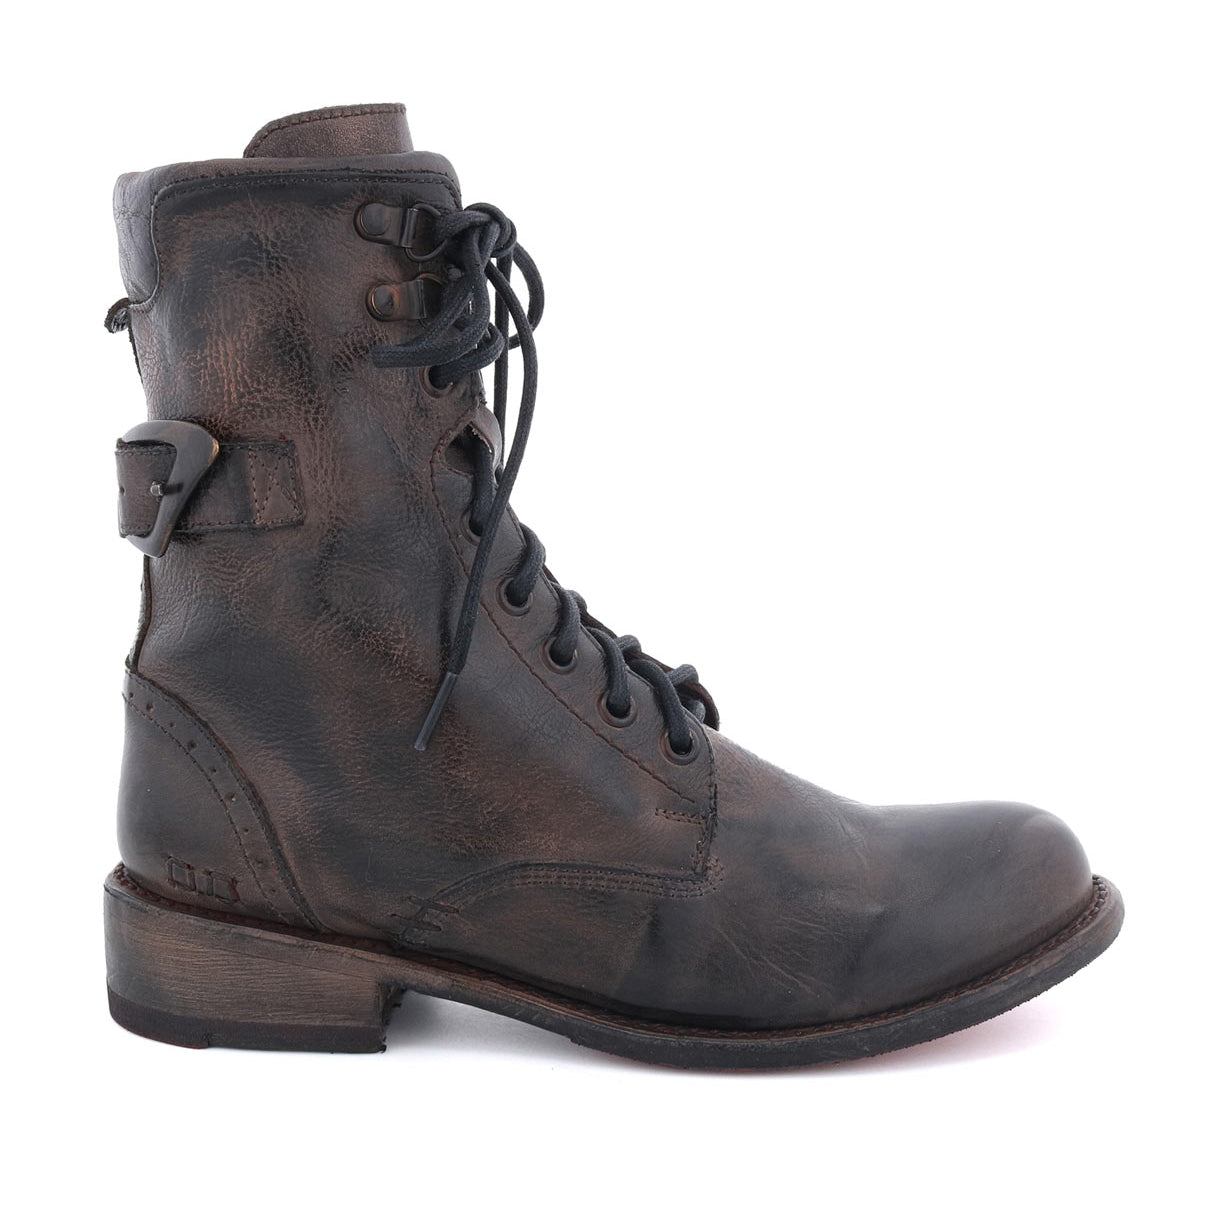 A women's black leather boot with metal buckles called Anne by Bed Stu.